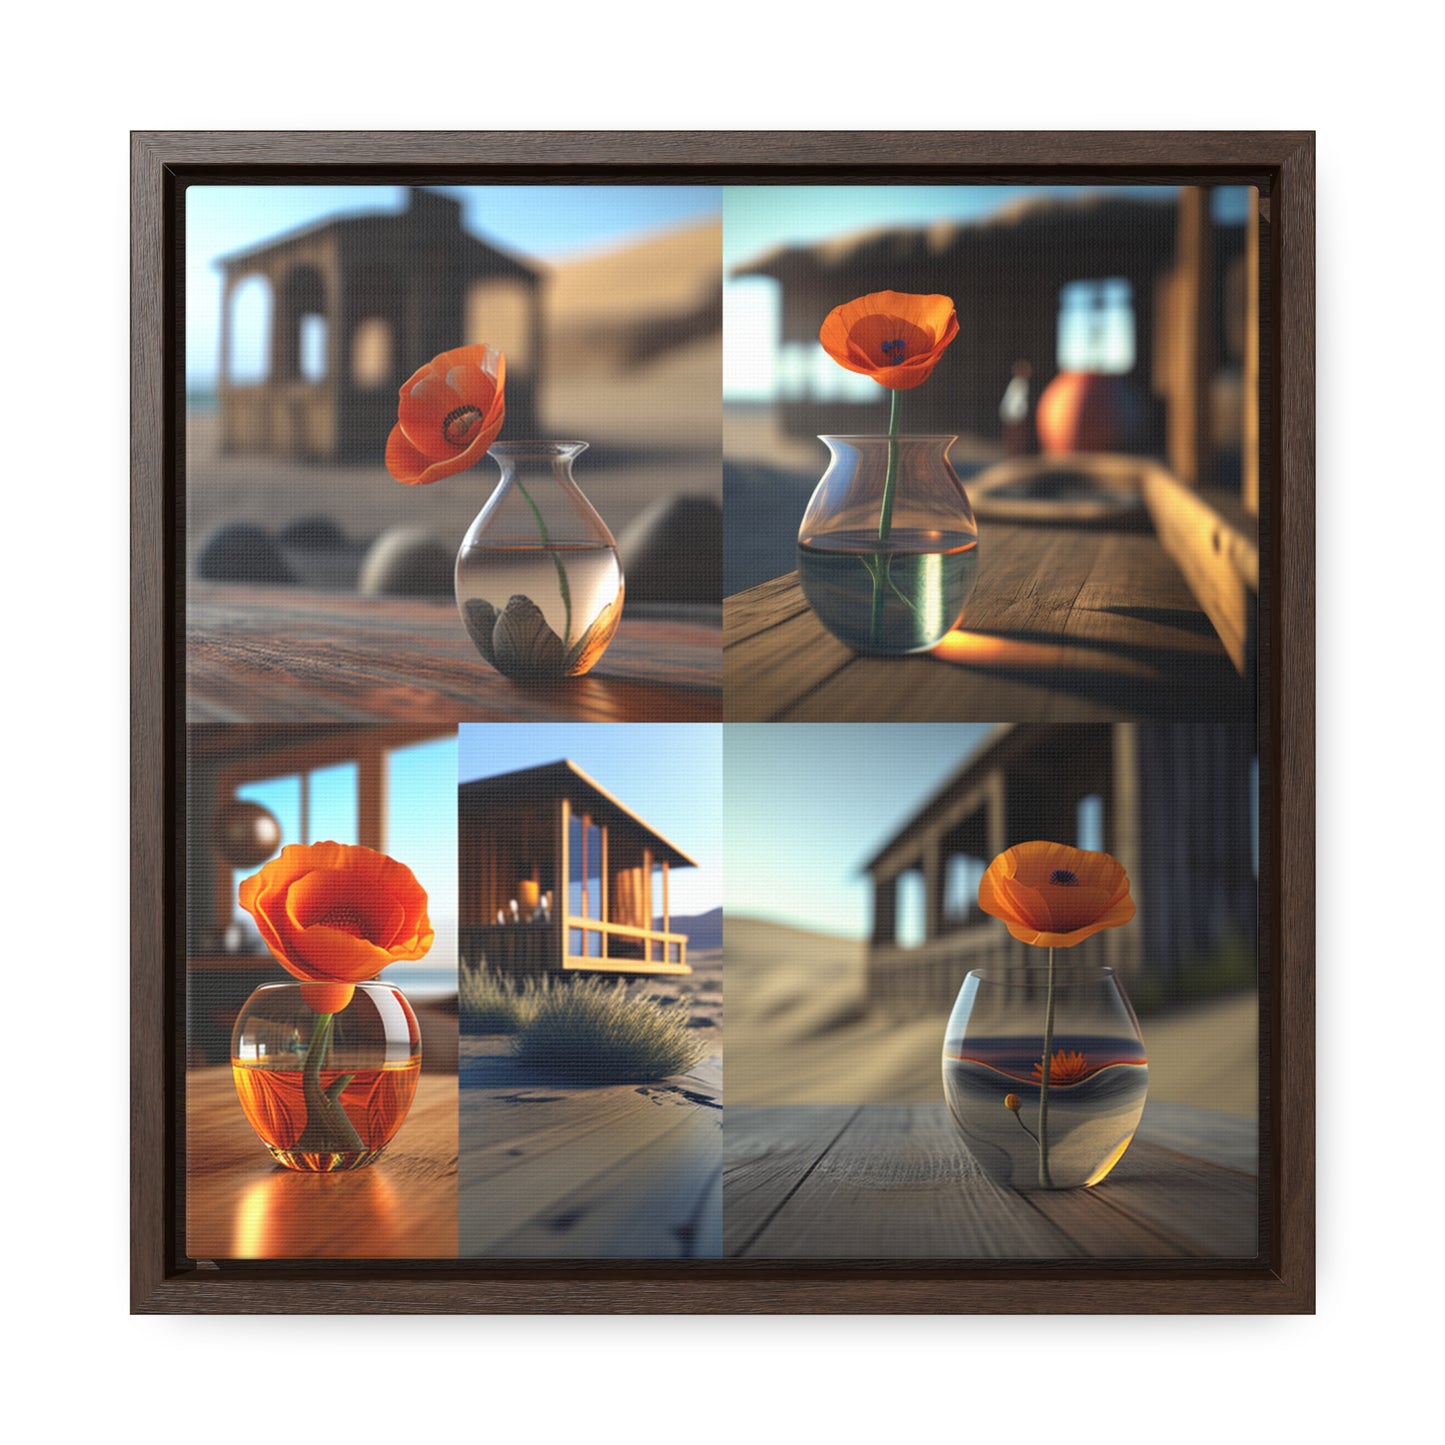 Gallery Canvas Wraps, Square Frame Poppy in a Glass Vase 5